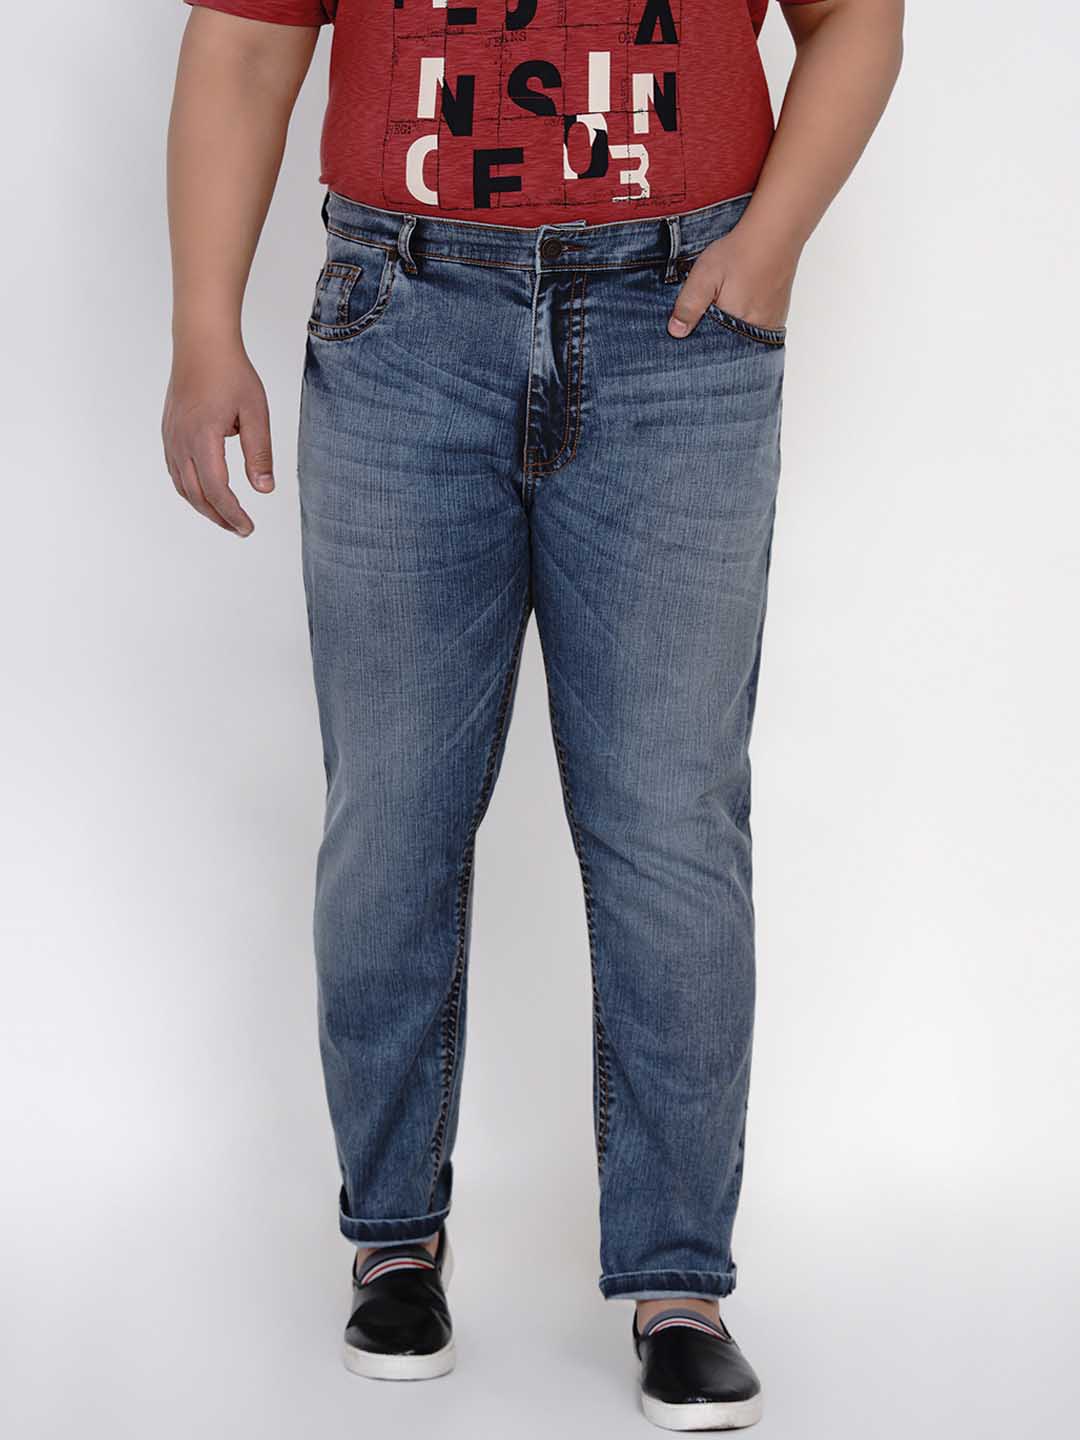 Plus Size Jeans Online India | Big & Tall Jeans | johnpride